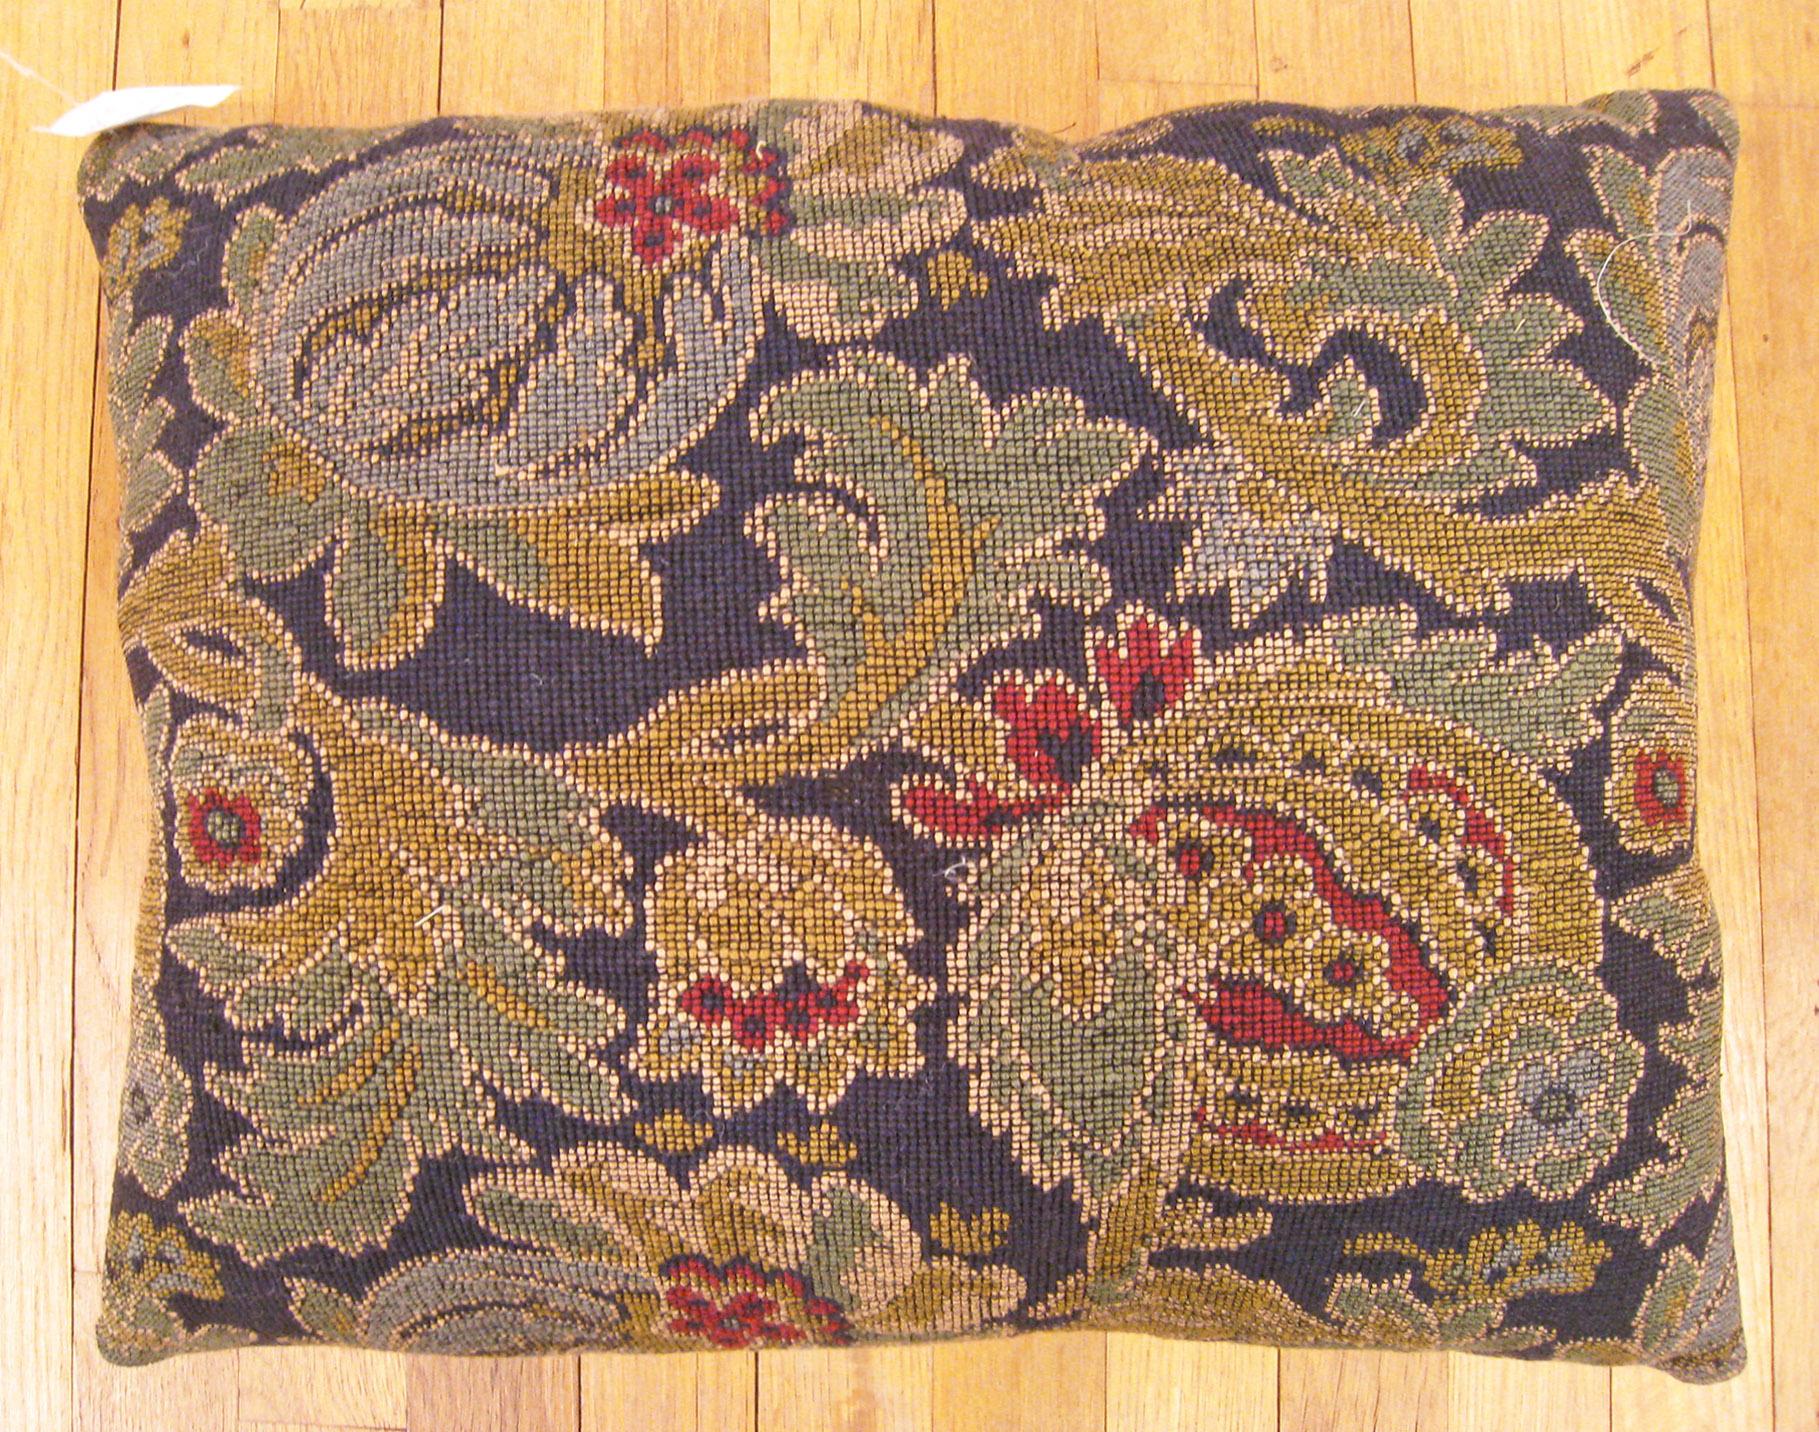 Antique Jacquard Tapestry Pillow; size 1'5” x 1'8”.

An antique decorative pillow with floral elements allover a gray green central field, size 1'5